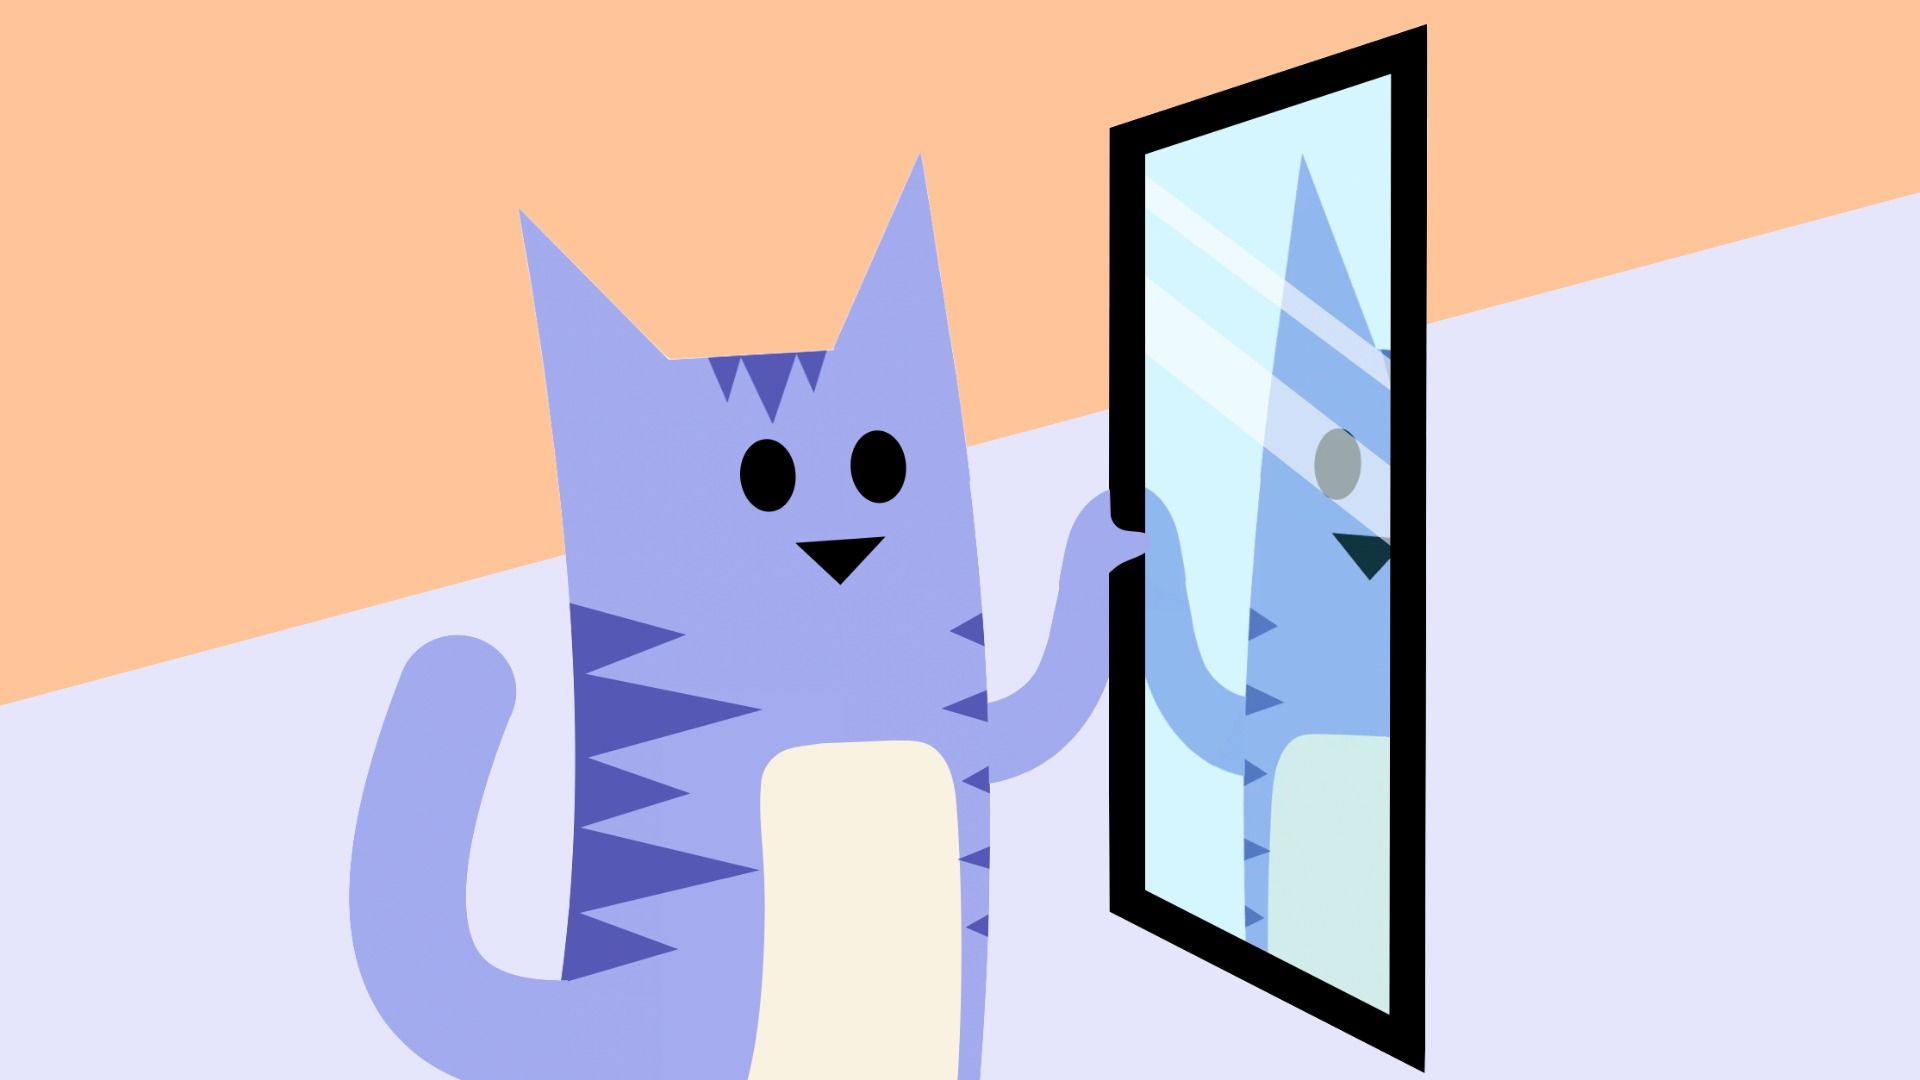 How to Mirror an Image Online